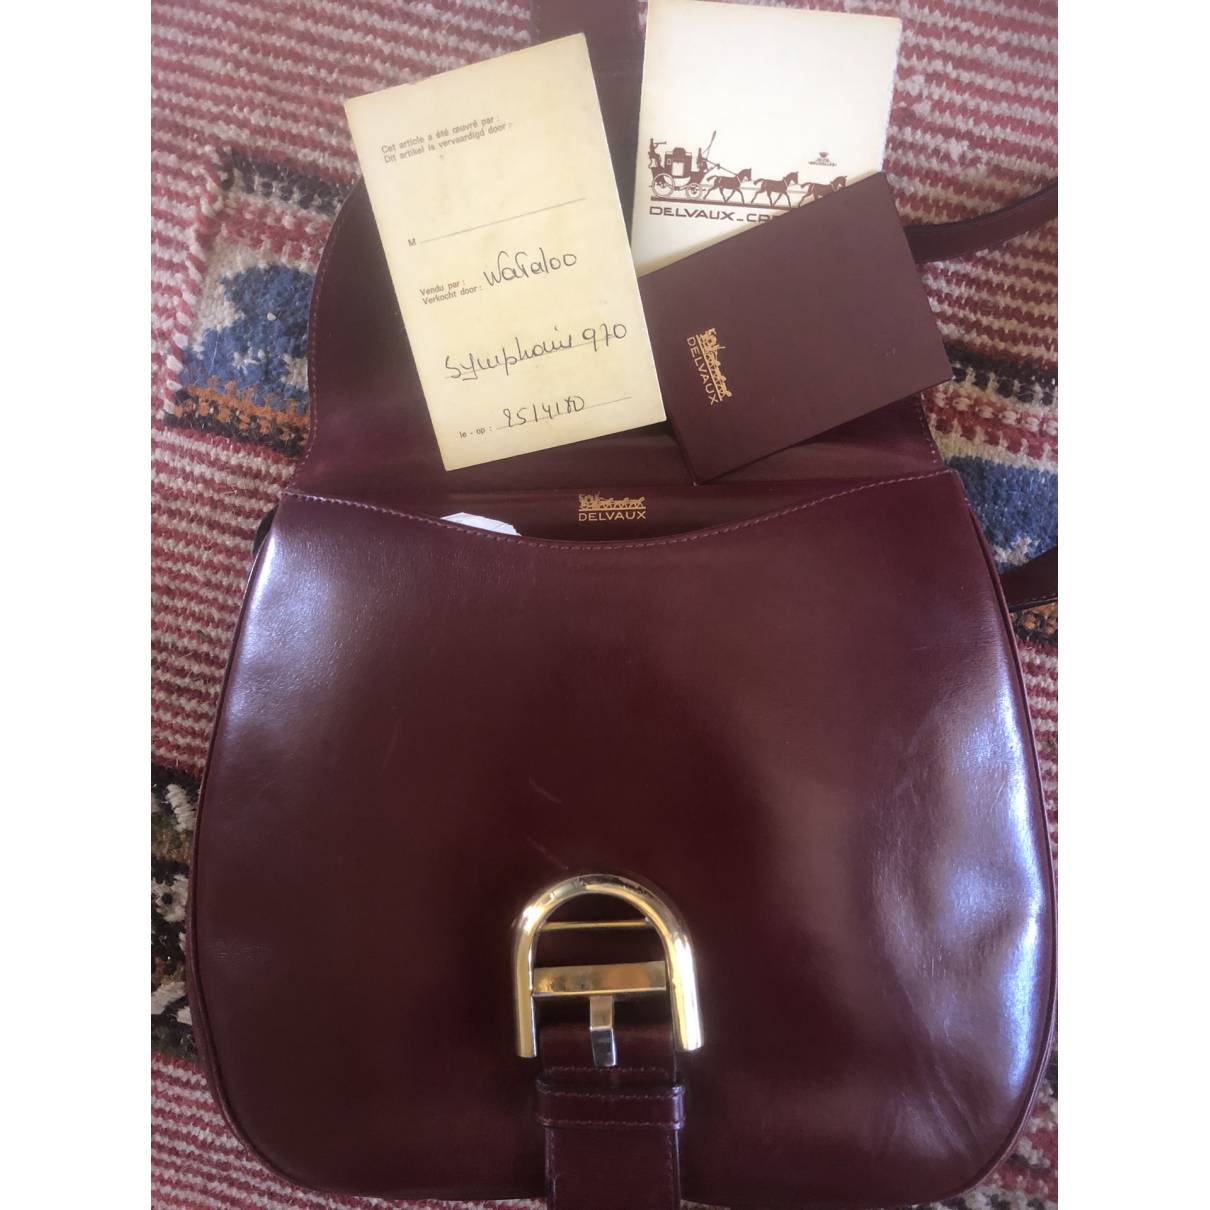 Delvaux - Authenticated Brillant Handbag - Leather Burgundy Plain for Women, Very Good Condition